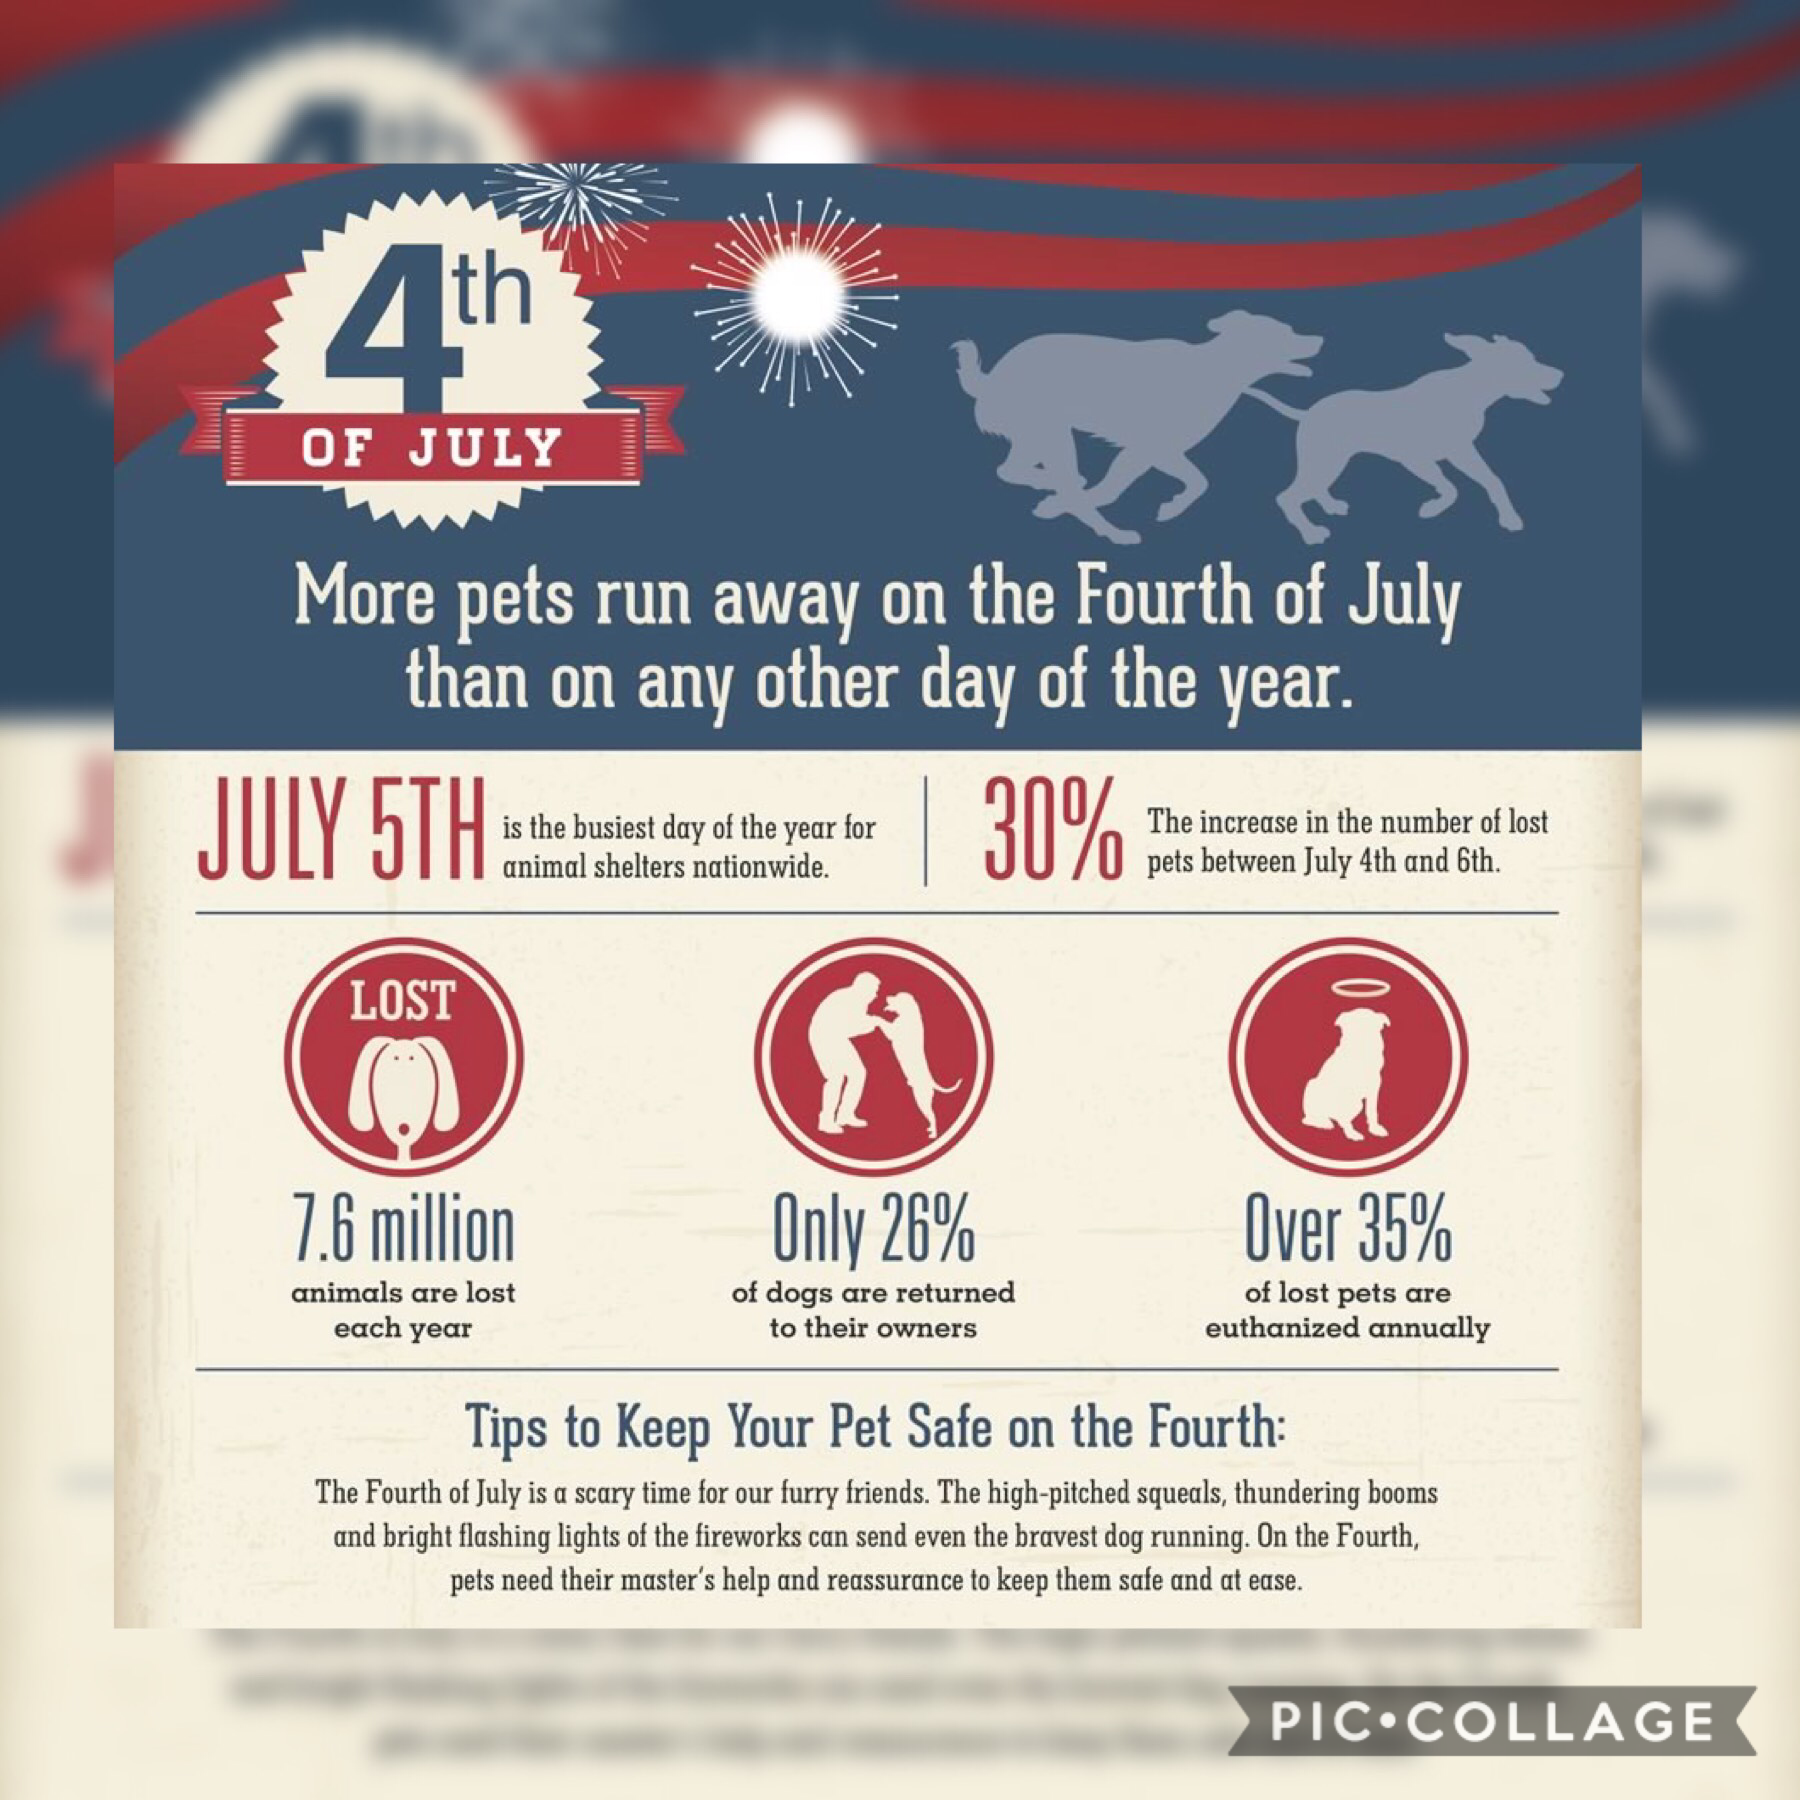 Happy Fourth Americans! Make sure you keep yourself and your pets safe, and have fun! Currently listening to Fourth of July by fall out boy. What are your plans today?